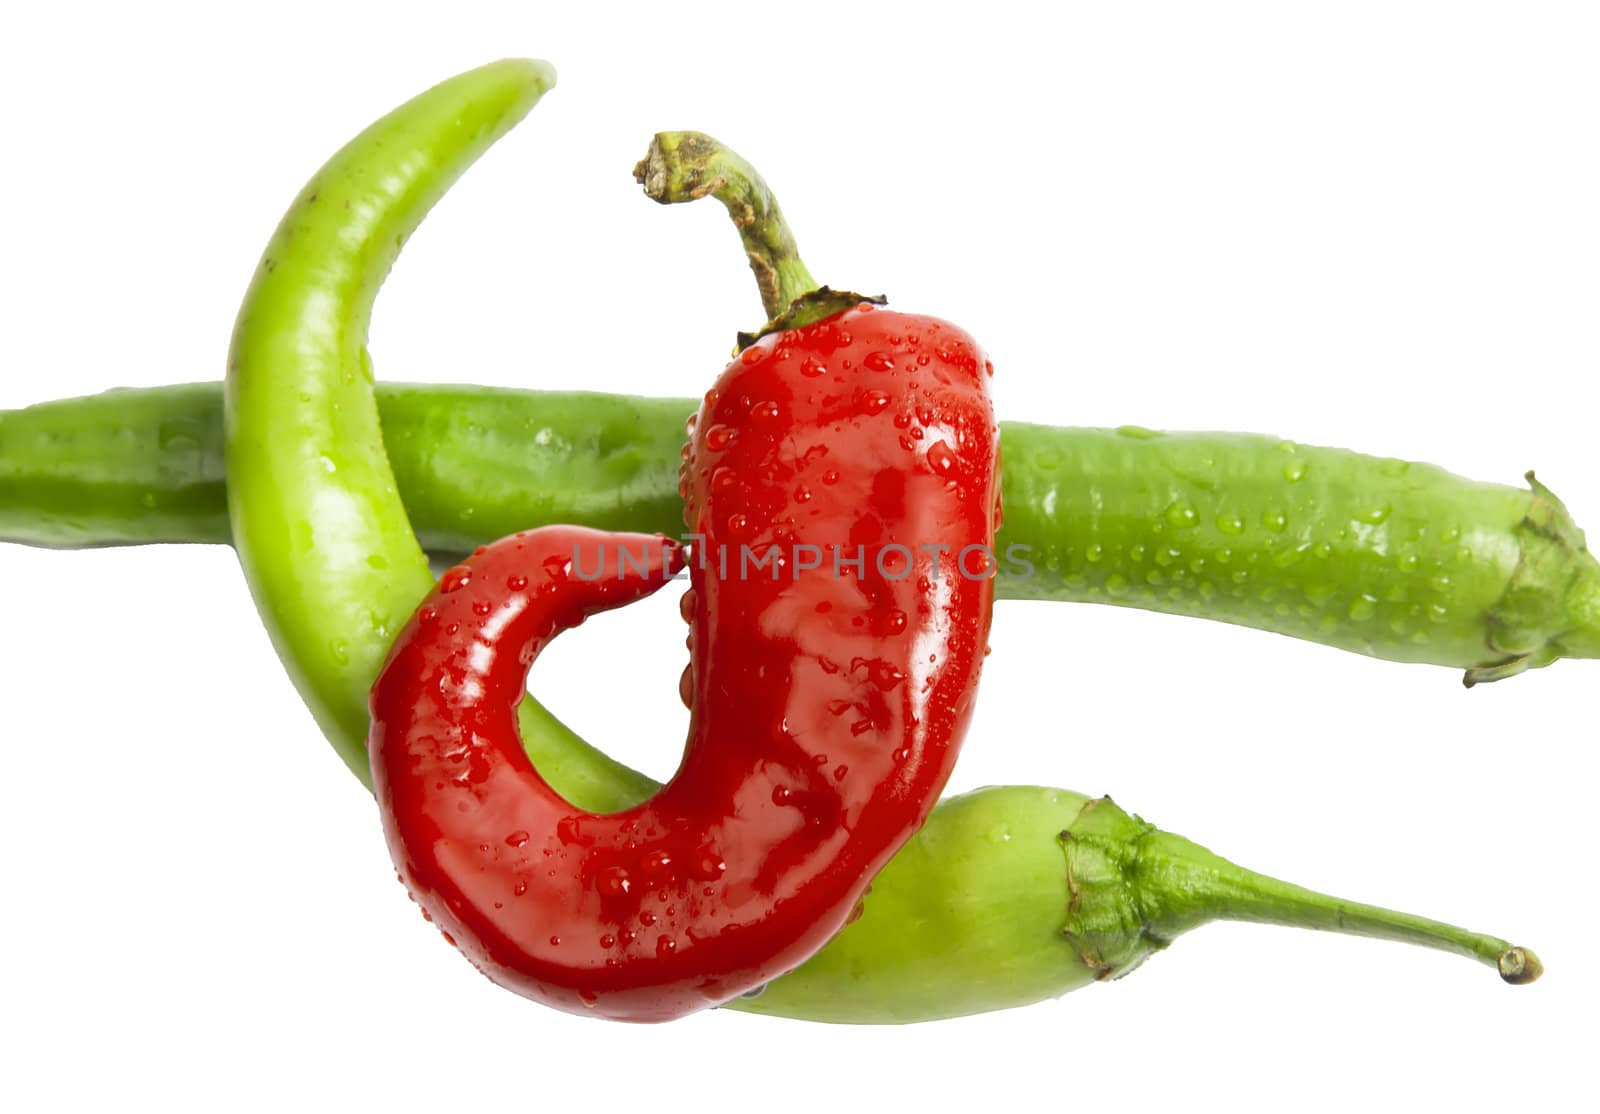 Straight green pepper and small red chili pepper